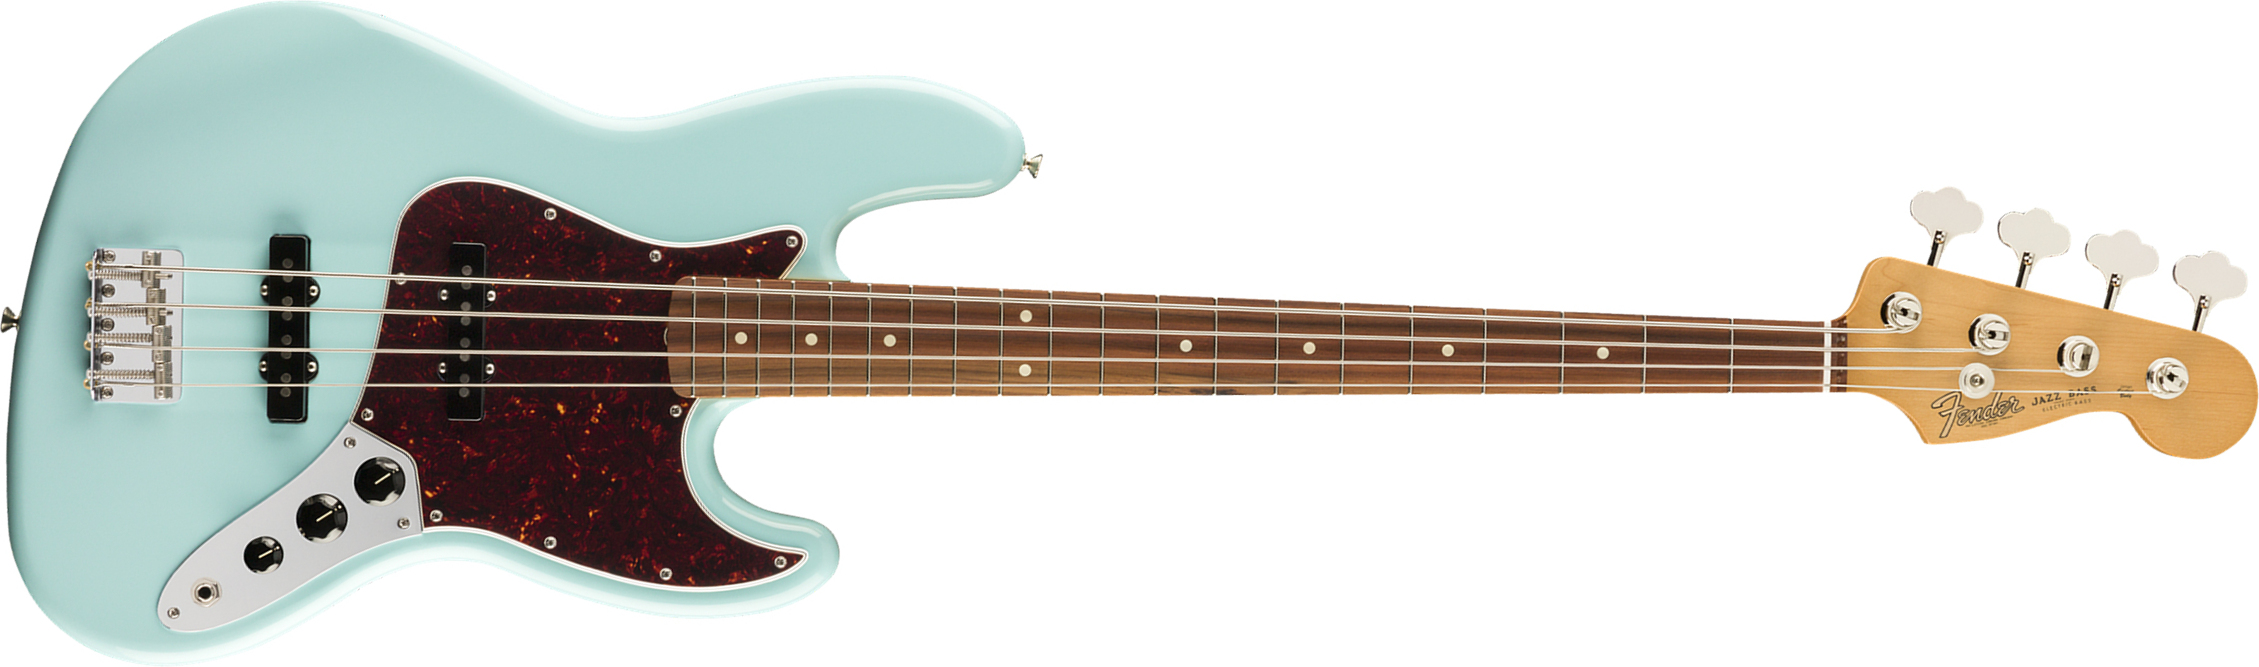 Fender Jazz Bass 60s Vintera Vintage Mex Pf - Daphne Blue - Solid body electric bass - Main picture